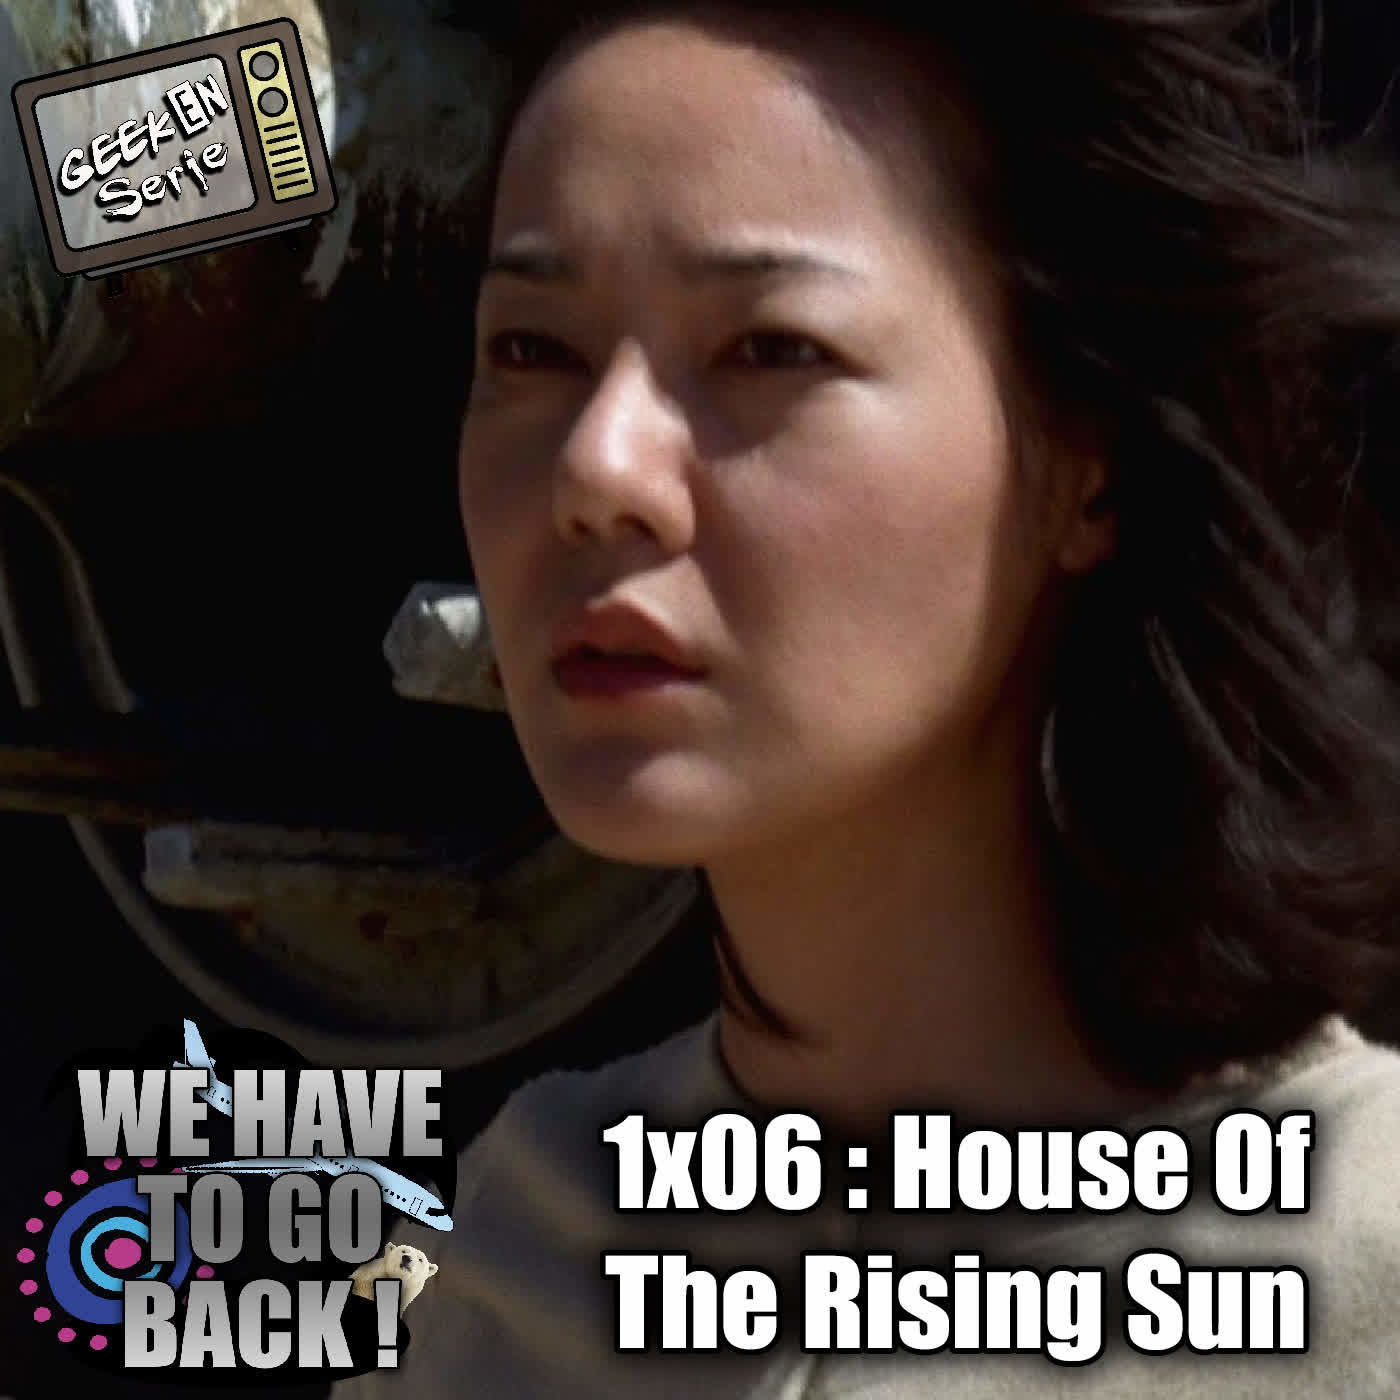 We have to go Back (Rewatch Lost) : 1x06 House Of The Rising Sun